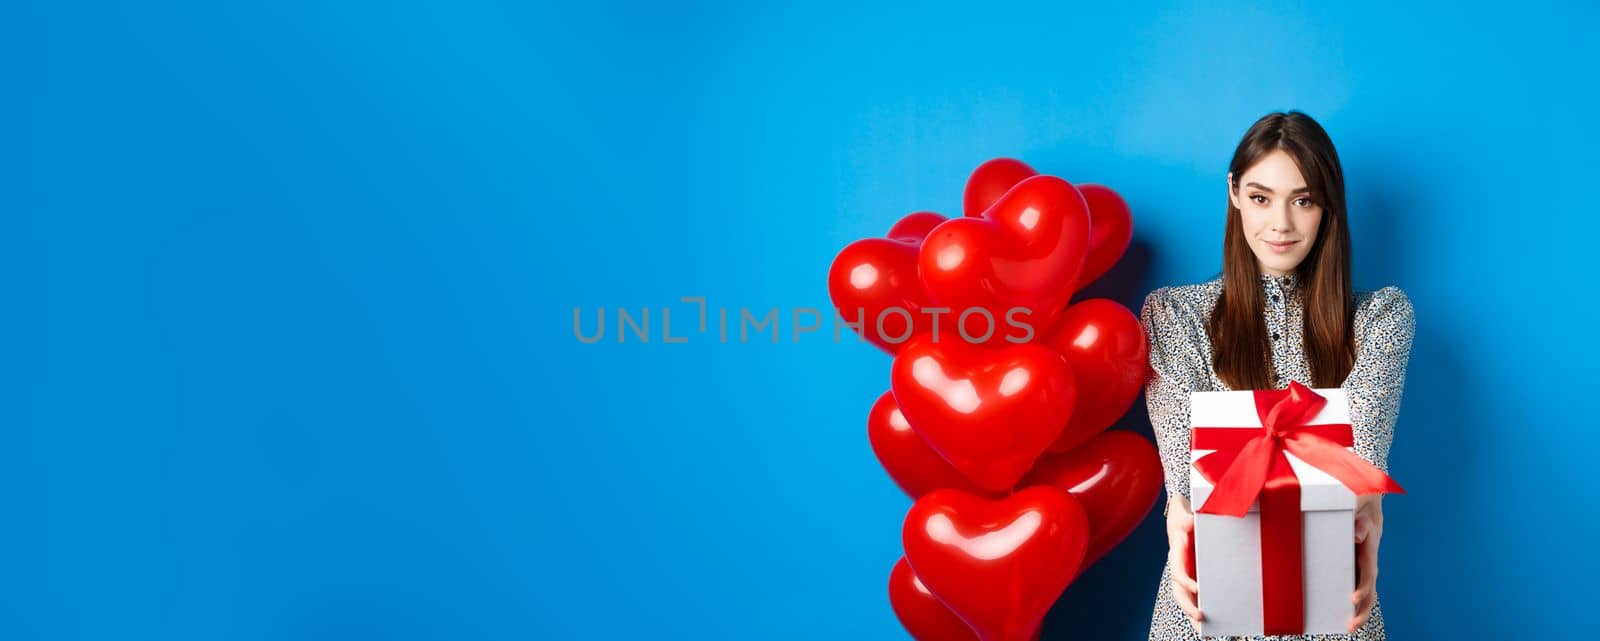 Valentines day. Romantic and cute girl stretching out hands with present, giving gift box to lover and smiling, standing near hearts balloons, blue background.